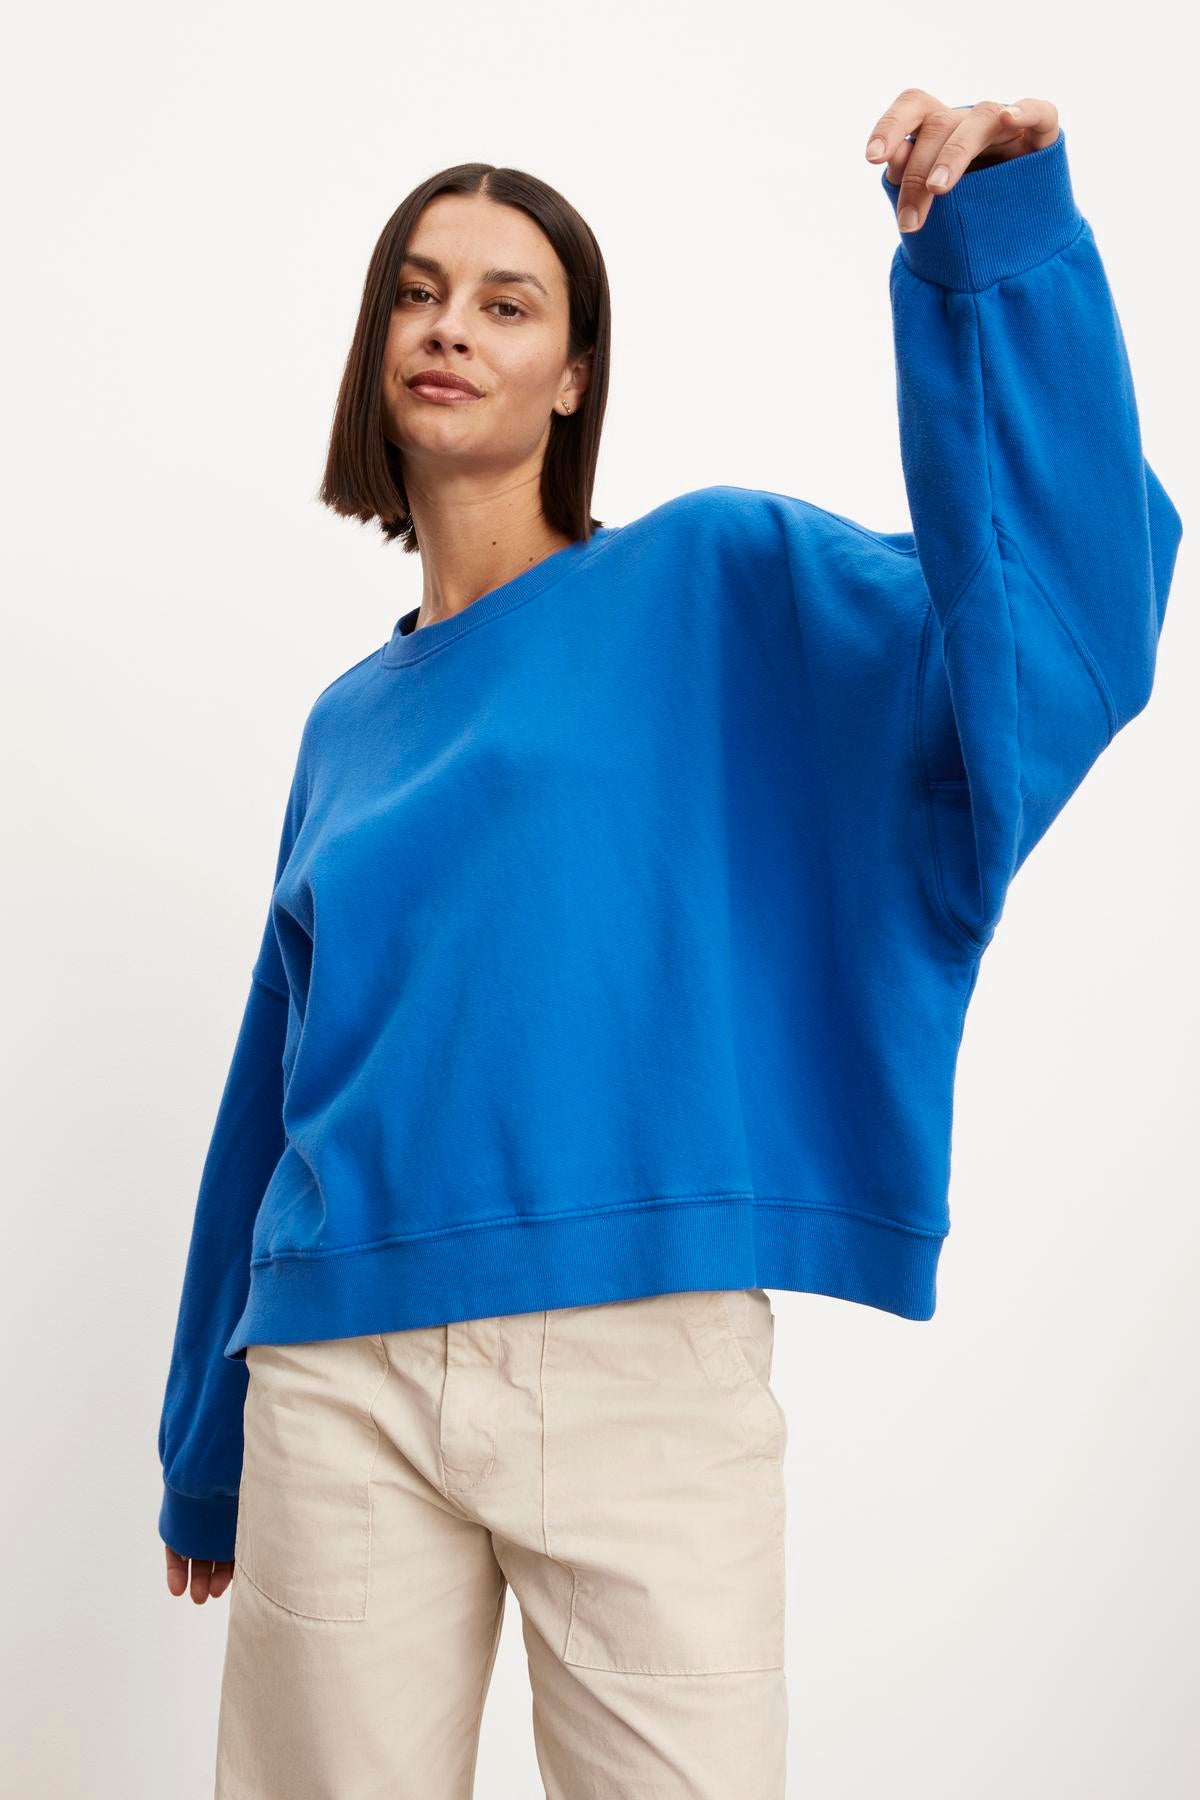 A model wearing the Velvet by Graham & Spencer Margot oversized sweatshirt made of soft fleece with relaxed and comfortable tan pants.-35961316049089